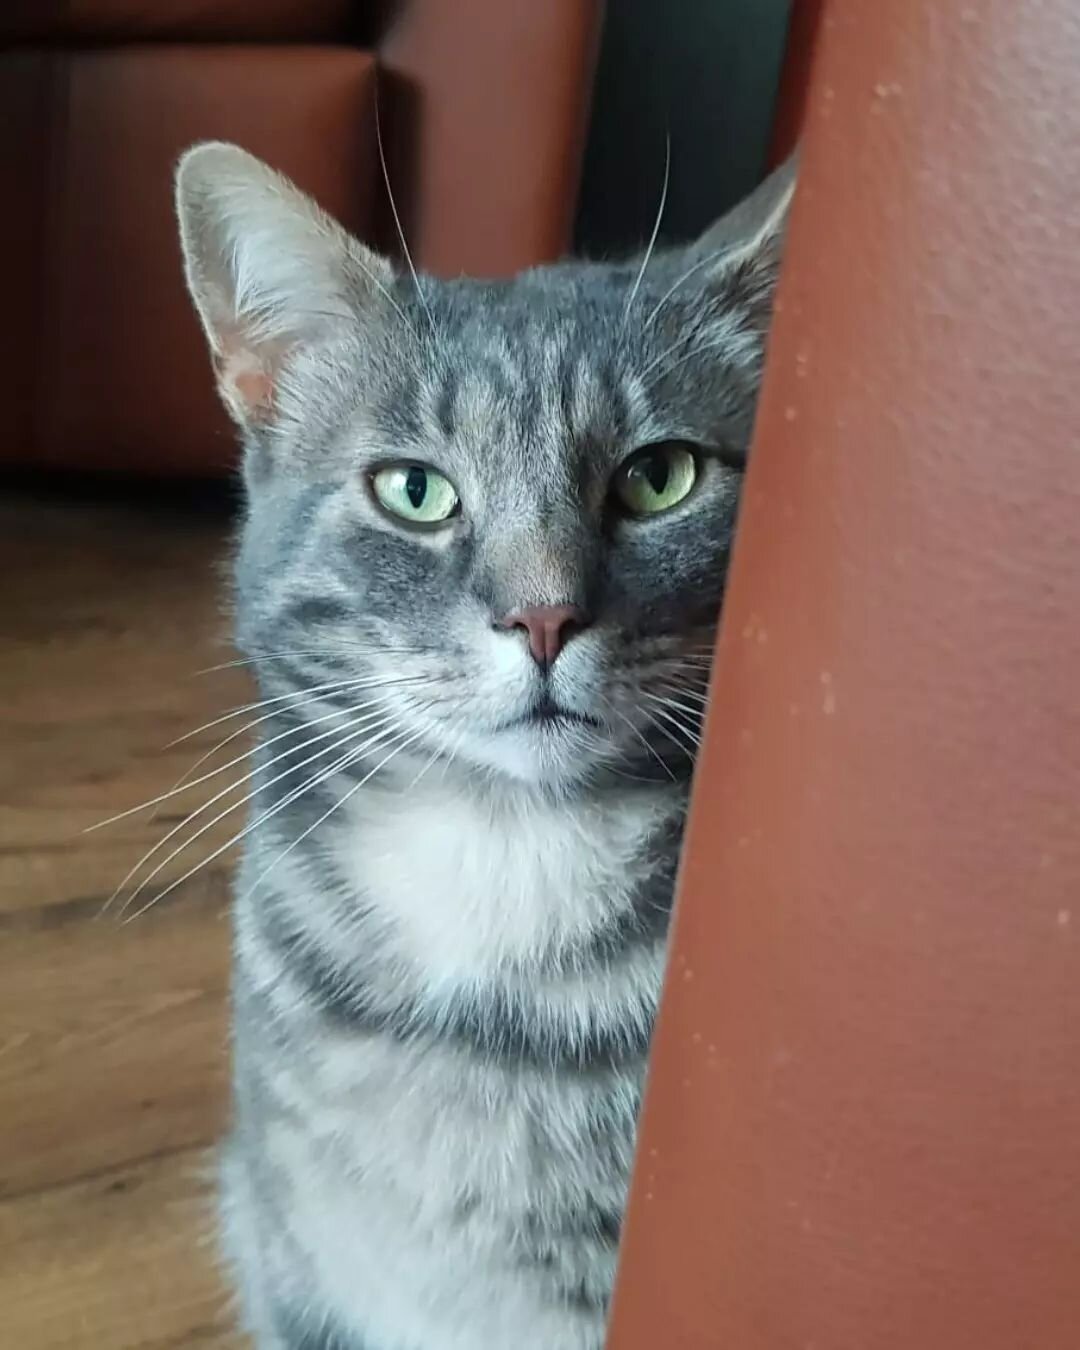 Elis 🐈 ❤ The latest member to the Campbell Family! 
Swipe for cutness overload! 😻 #cats #catsofinstagram #animals #kitten #cute #cat #meow #tabby #silver #love #welsh #wales #uk #family